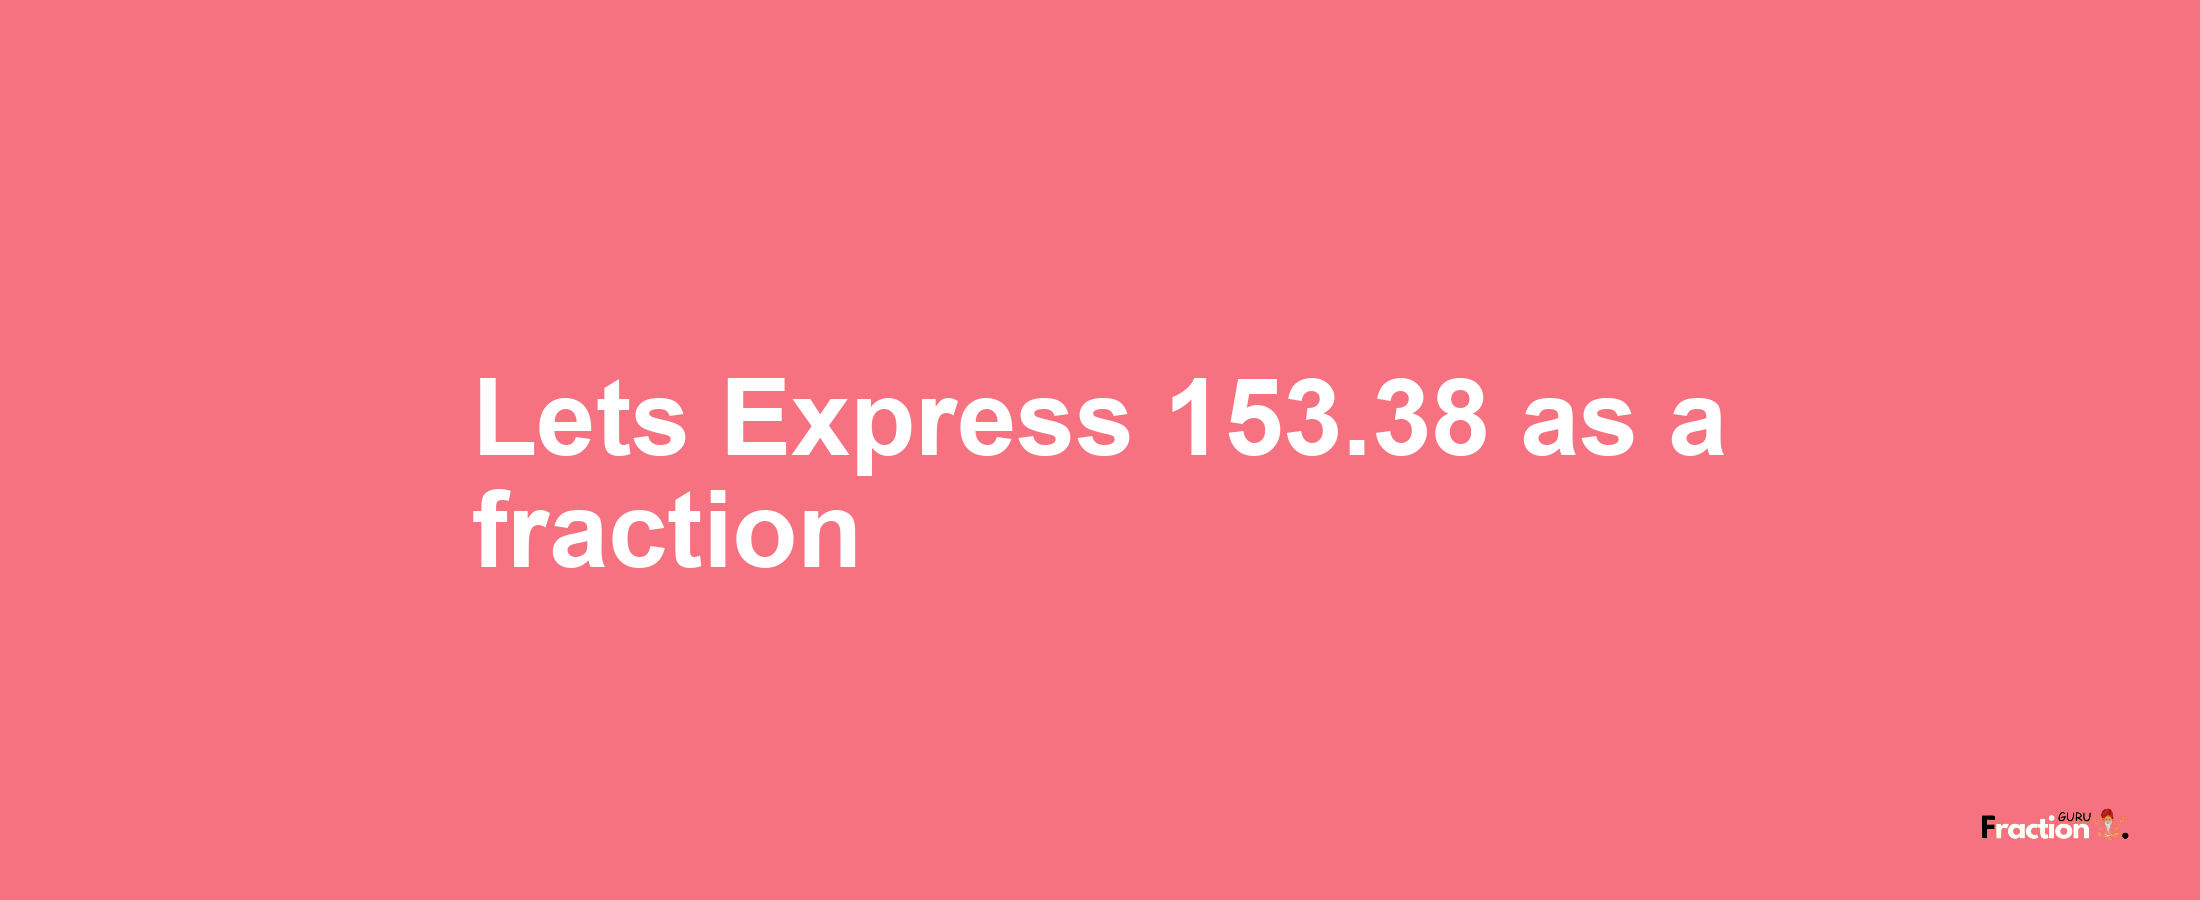 Lets Express 153.38 as afraction